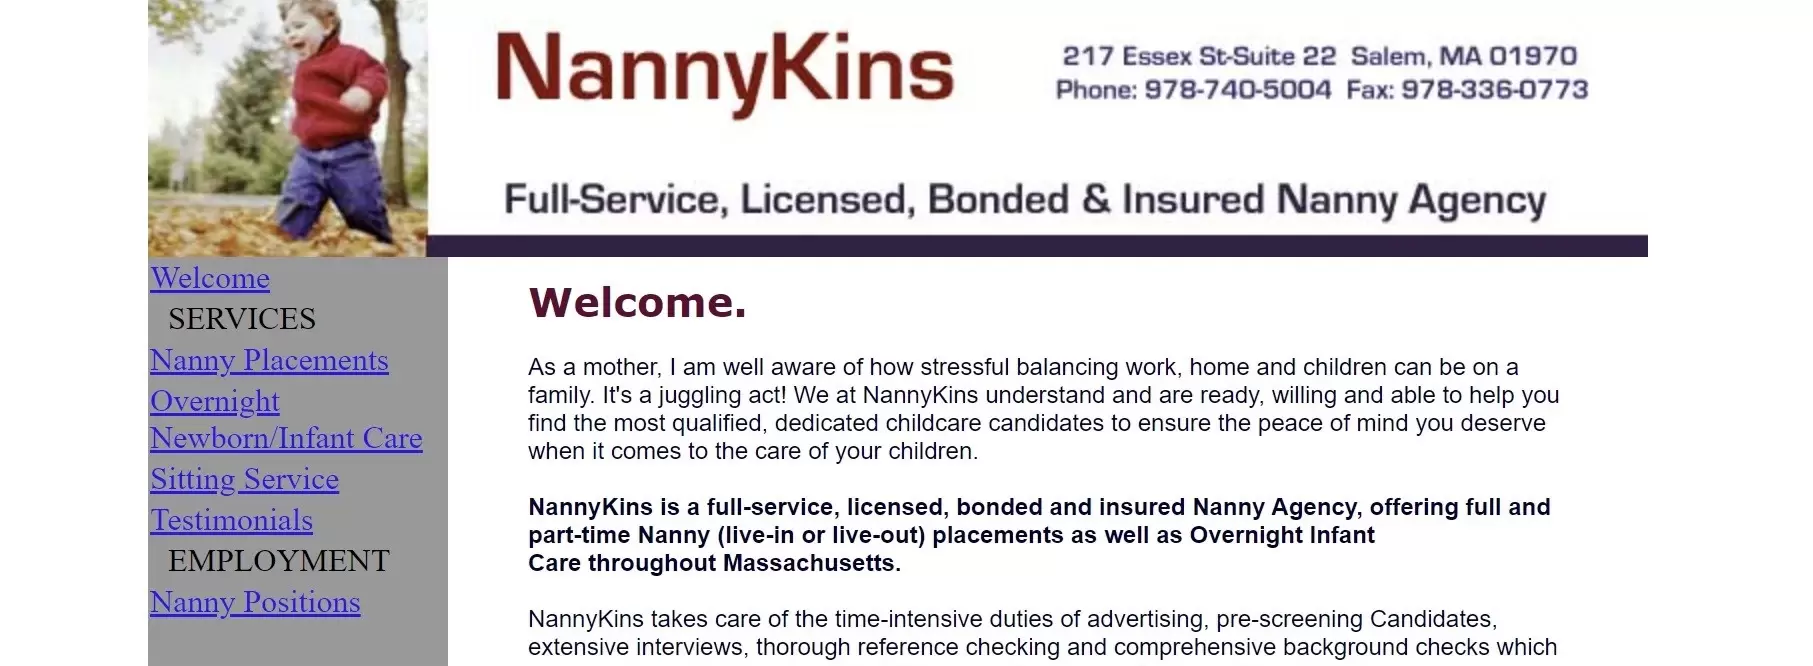 NannyKins company profile and review